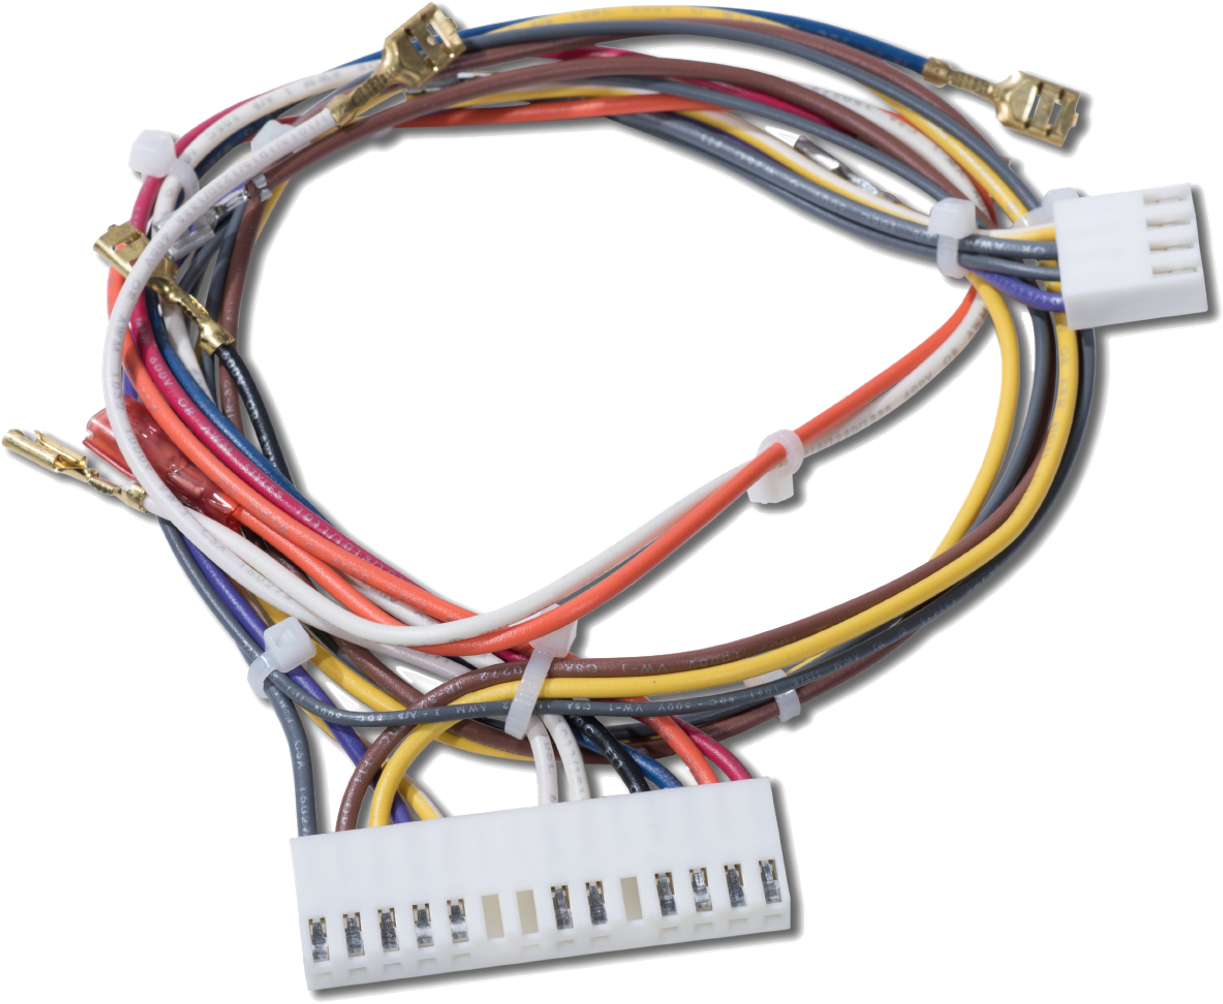 041c4876- Wire Harness Kit - Electrical Wiring (1240x1240), Png Download